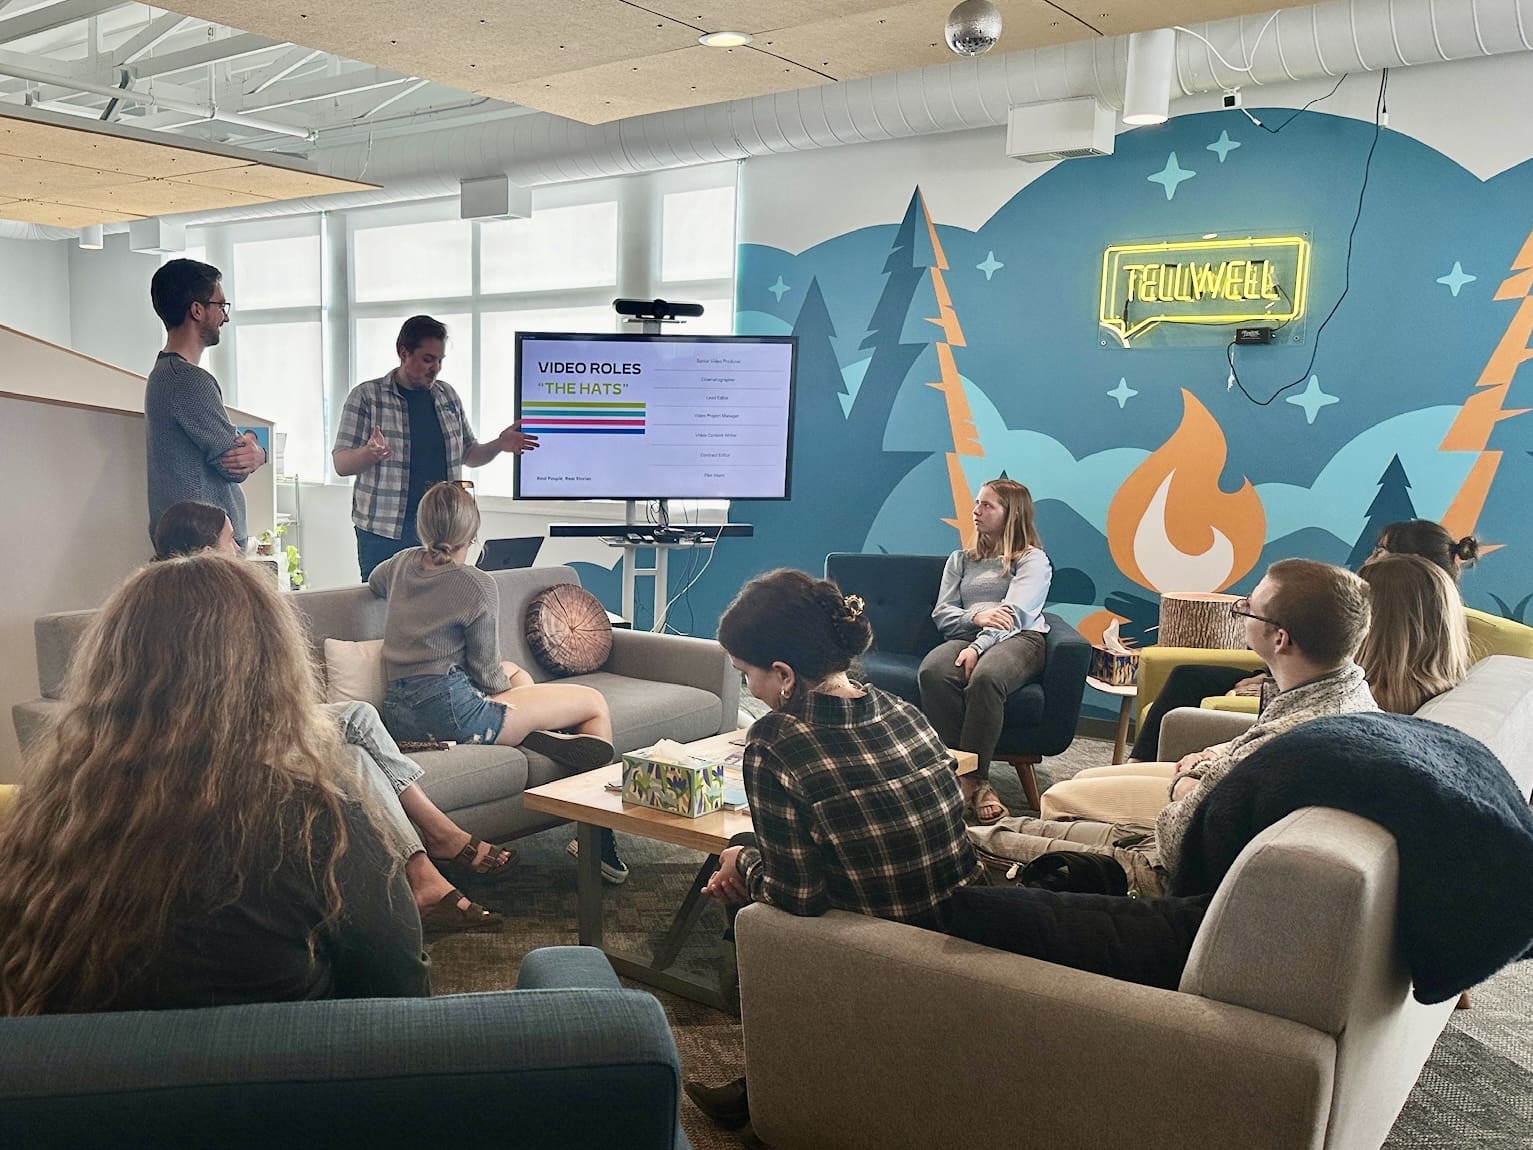 A casual office presentation with two speakers in front of a screen displaying 'VIDEO ROLES' while a group listens attentively, seated on couches in a cozy set up.